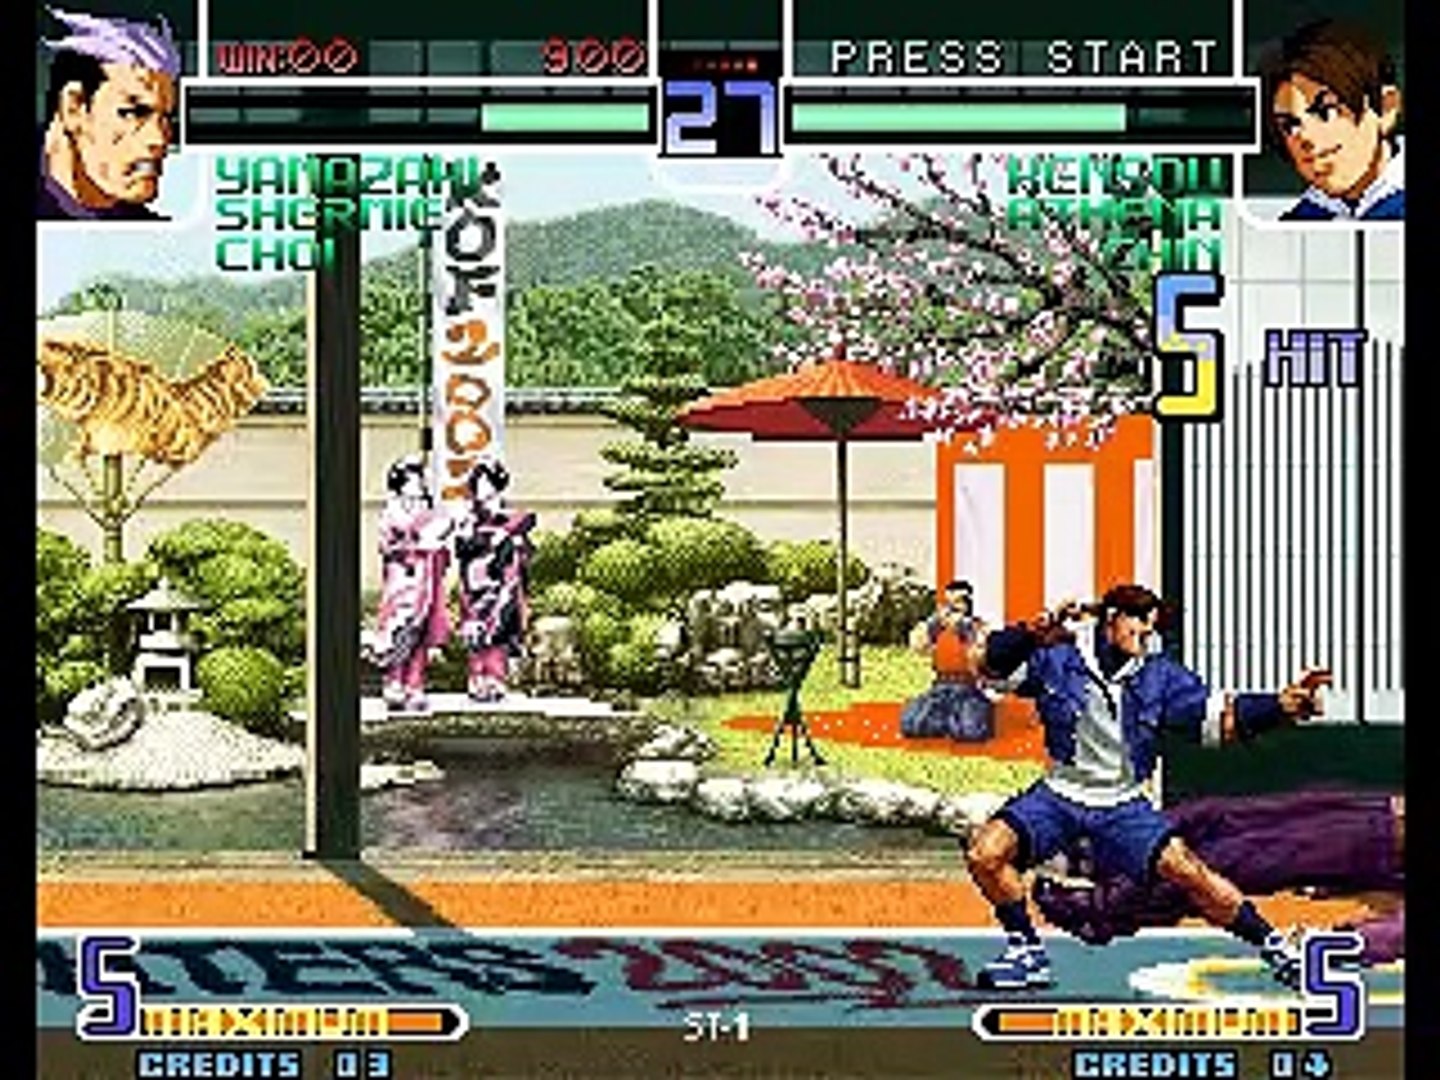 Play The King Of Fighters 2002 Magic Plus Game, The King Of Fighters 2002  Magic Plus Play Online, Play KOF 2002 Magic Plus Game